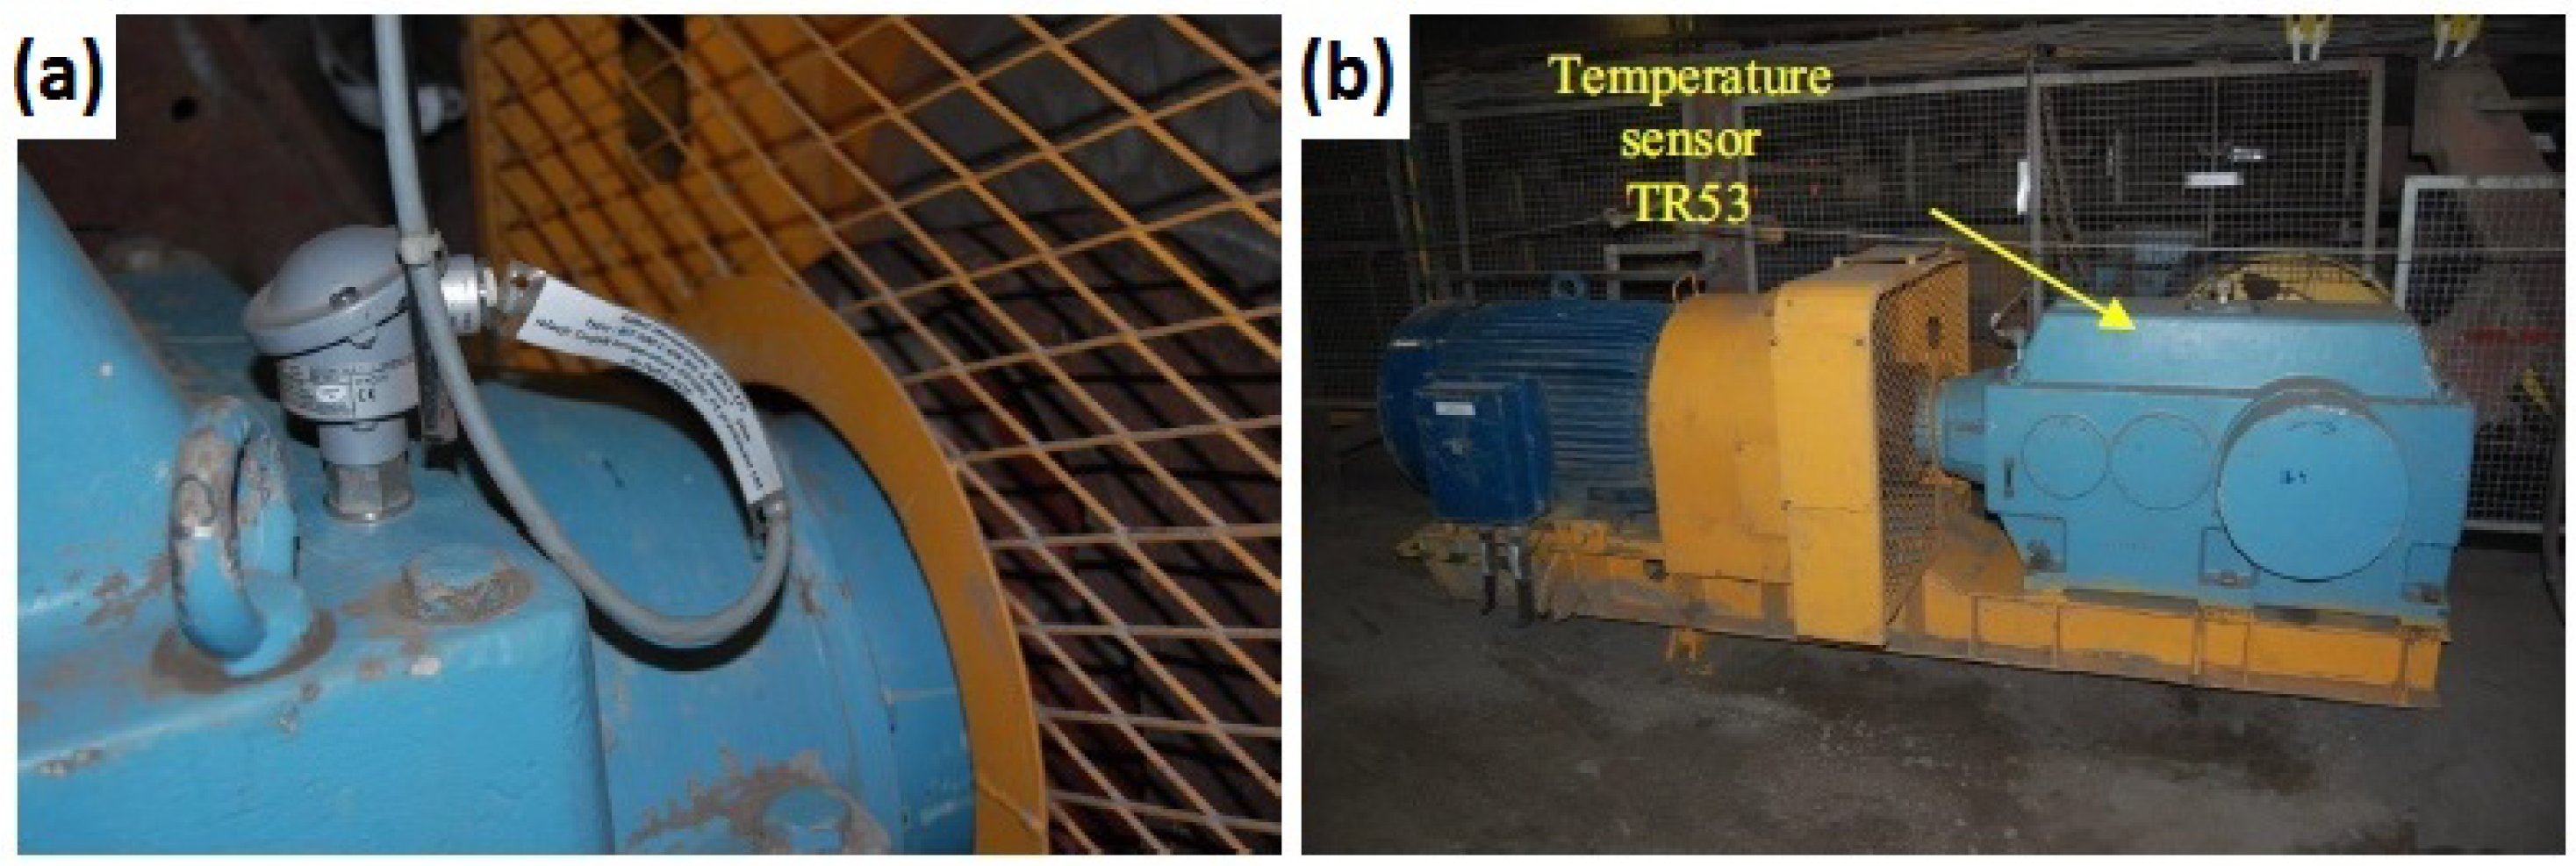 Applied Sciences | Free Full-Text | An Inspection Robot for Belt Conveyor  Maintenance in Underground Mine—Infrared Thermography for Overheated Idlers  Detection